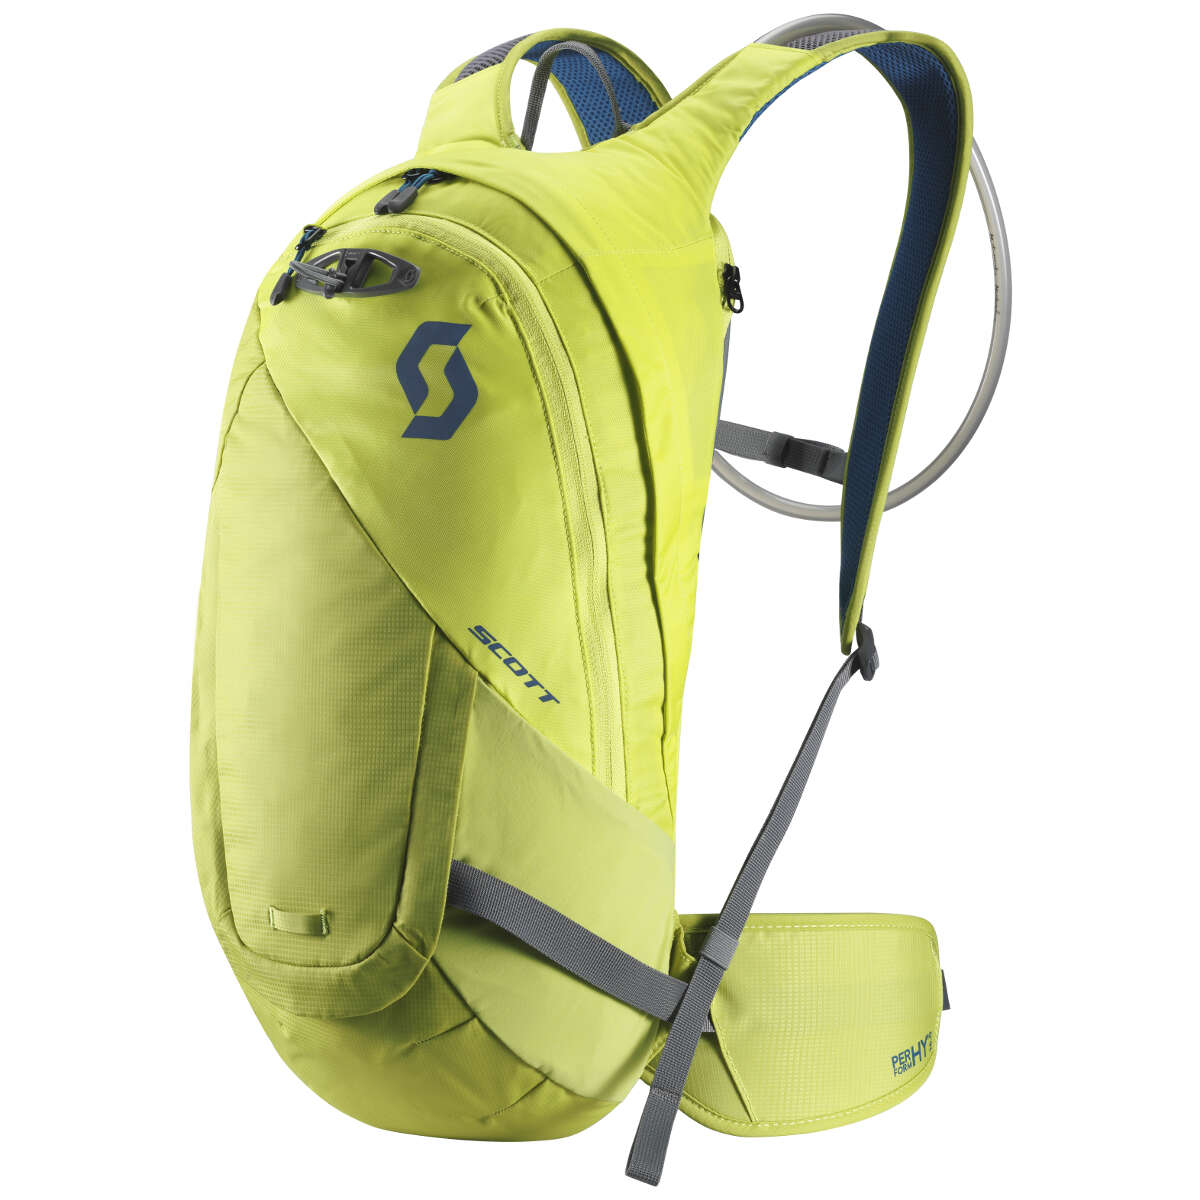 Scott Backpack with Hydration System Compartment, 16 Liter Perform HY 16 Sulphur Yellow/Seaport Blue